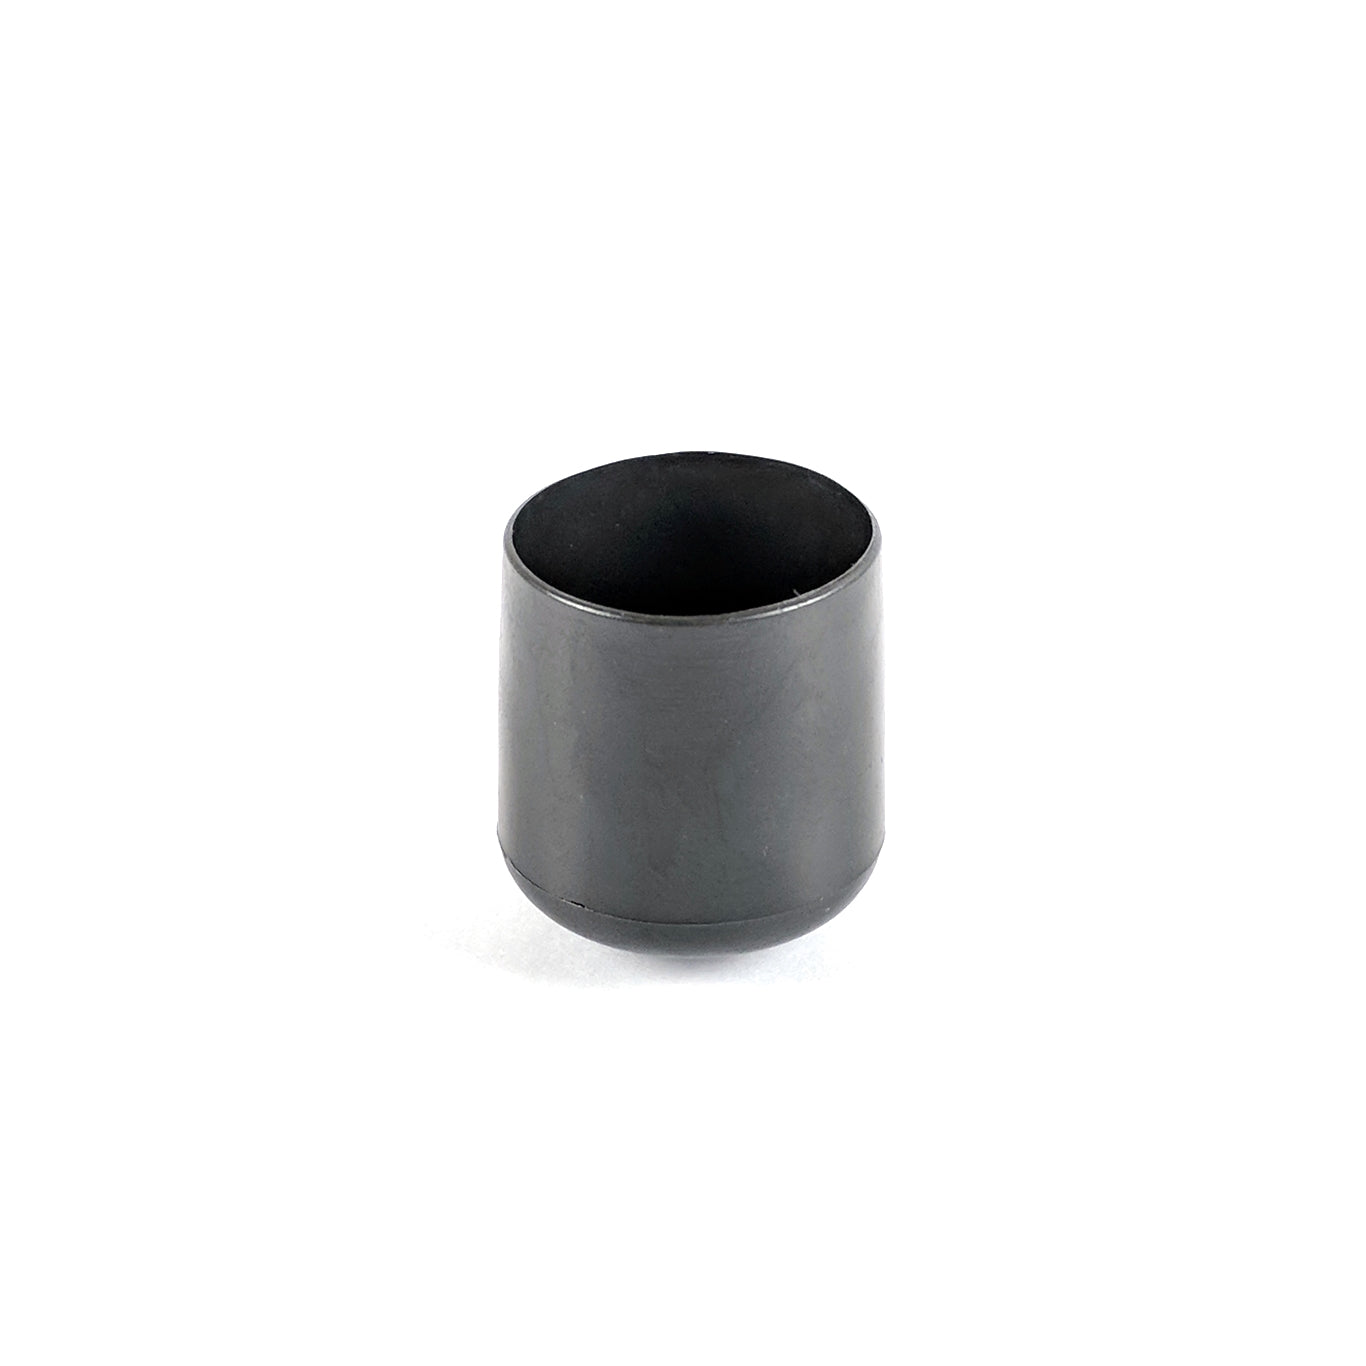 25mm Round Plastic Ferrules End Caps - Made in Germany - Keay Vital Parts